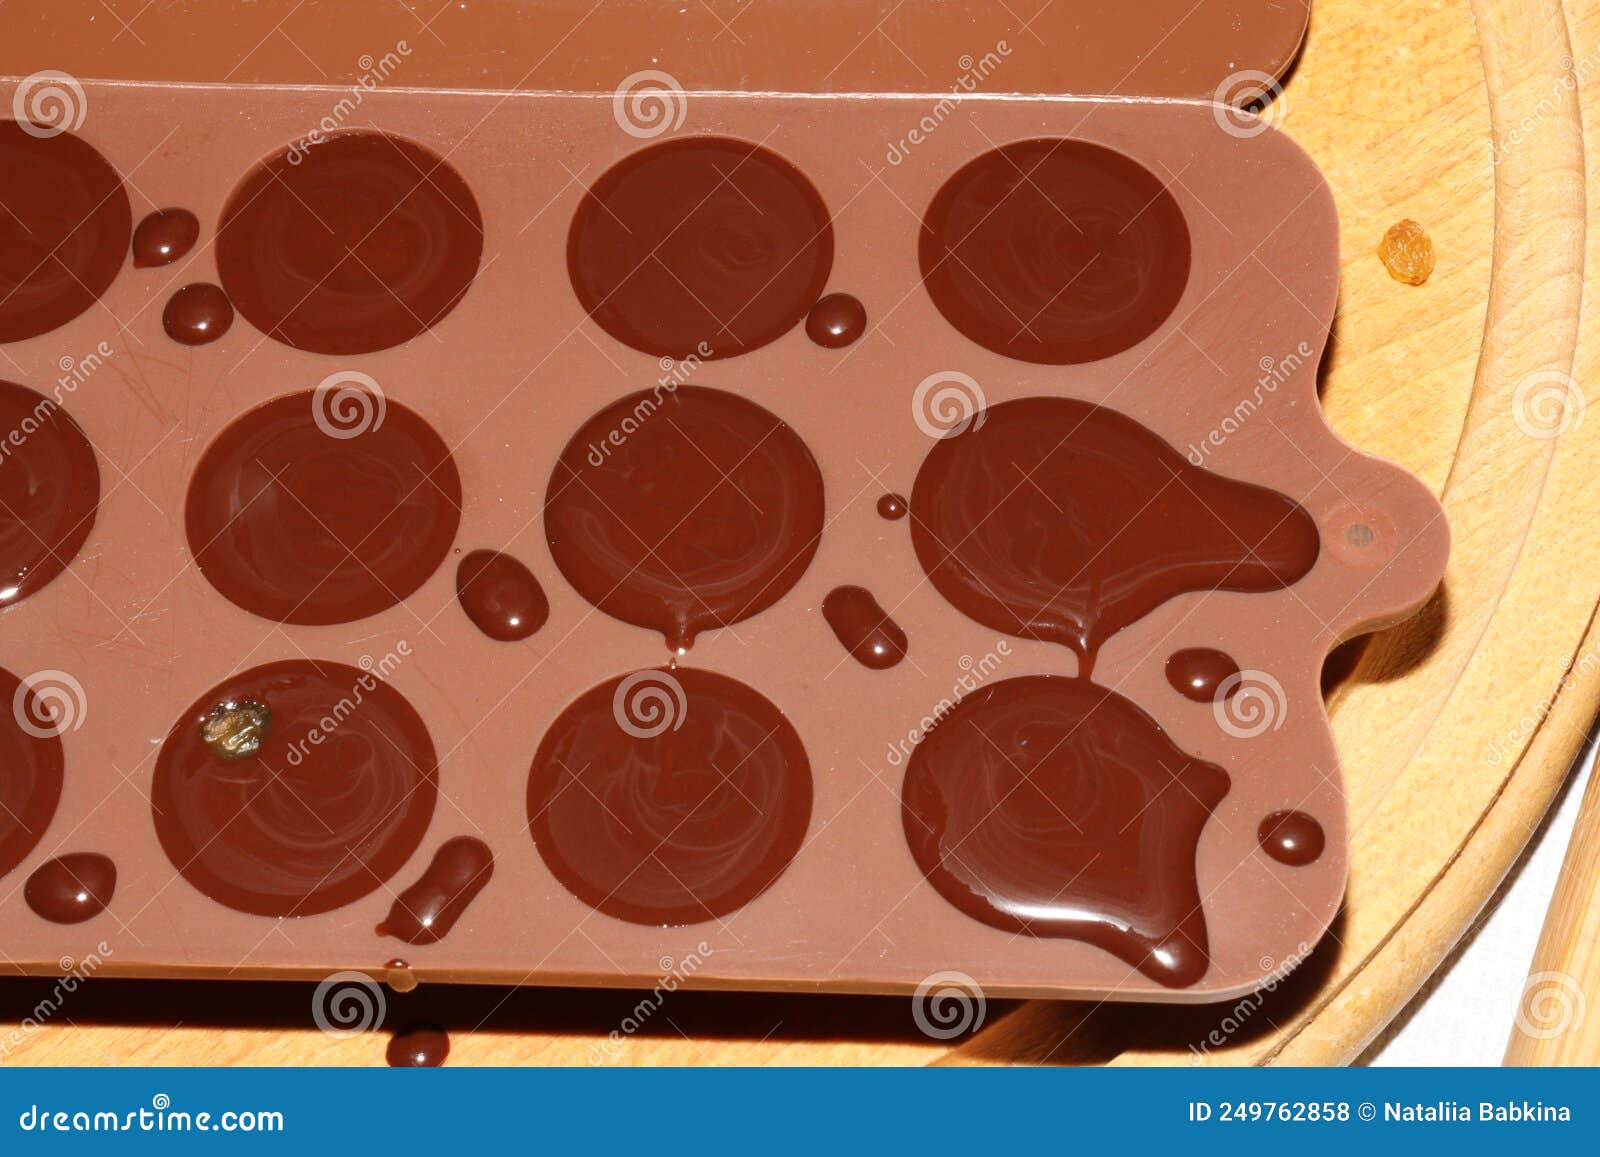 silicone molds for shaping chocolate and sweets are filled with hot chocolate to cool